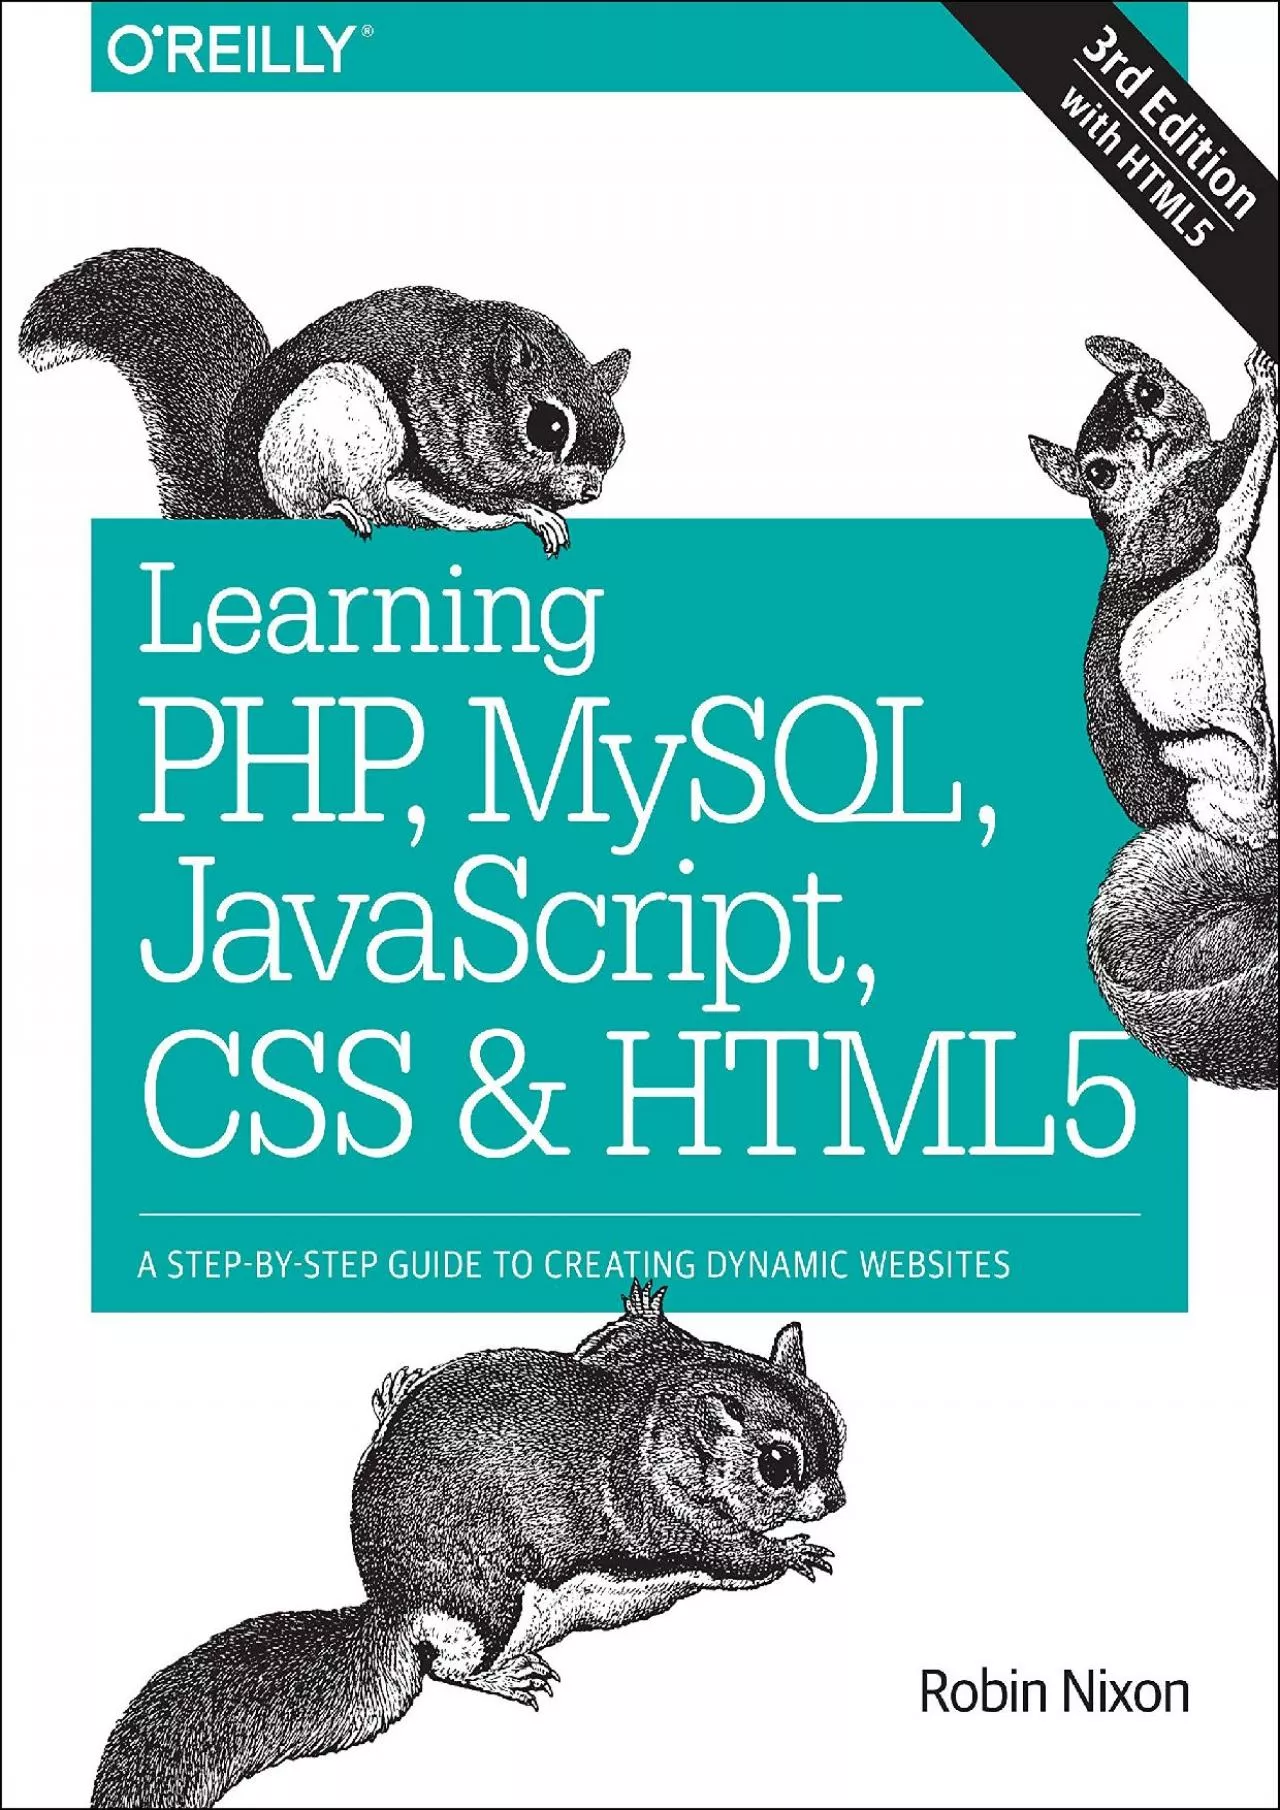 [BEST]-Learning PHP, MySQL, JavaScript, CSS  HTML5: A Step-by-Step Guide to Creating Dynamic